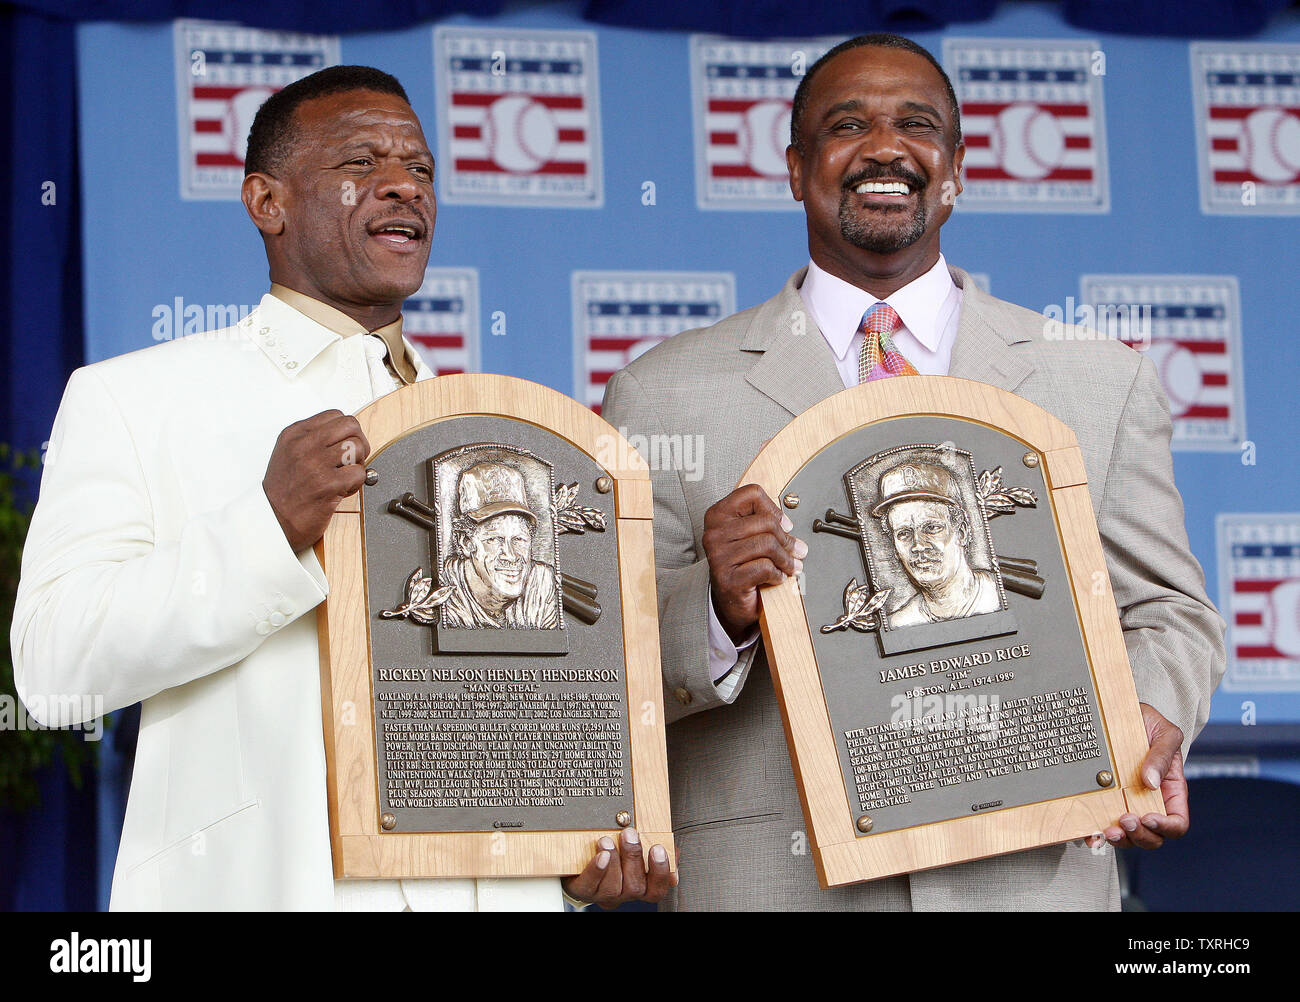 New National Baseball Hall of Fame members Rickey Henderson (L) and Jim Rice smile for photographs following the their induction ceremony in Cooperstown, New York on July 26, 2009.  (UPI Photo/Bill Greenblatt) Stock Photo